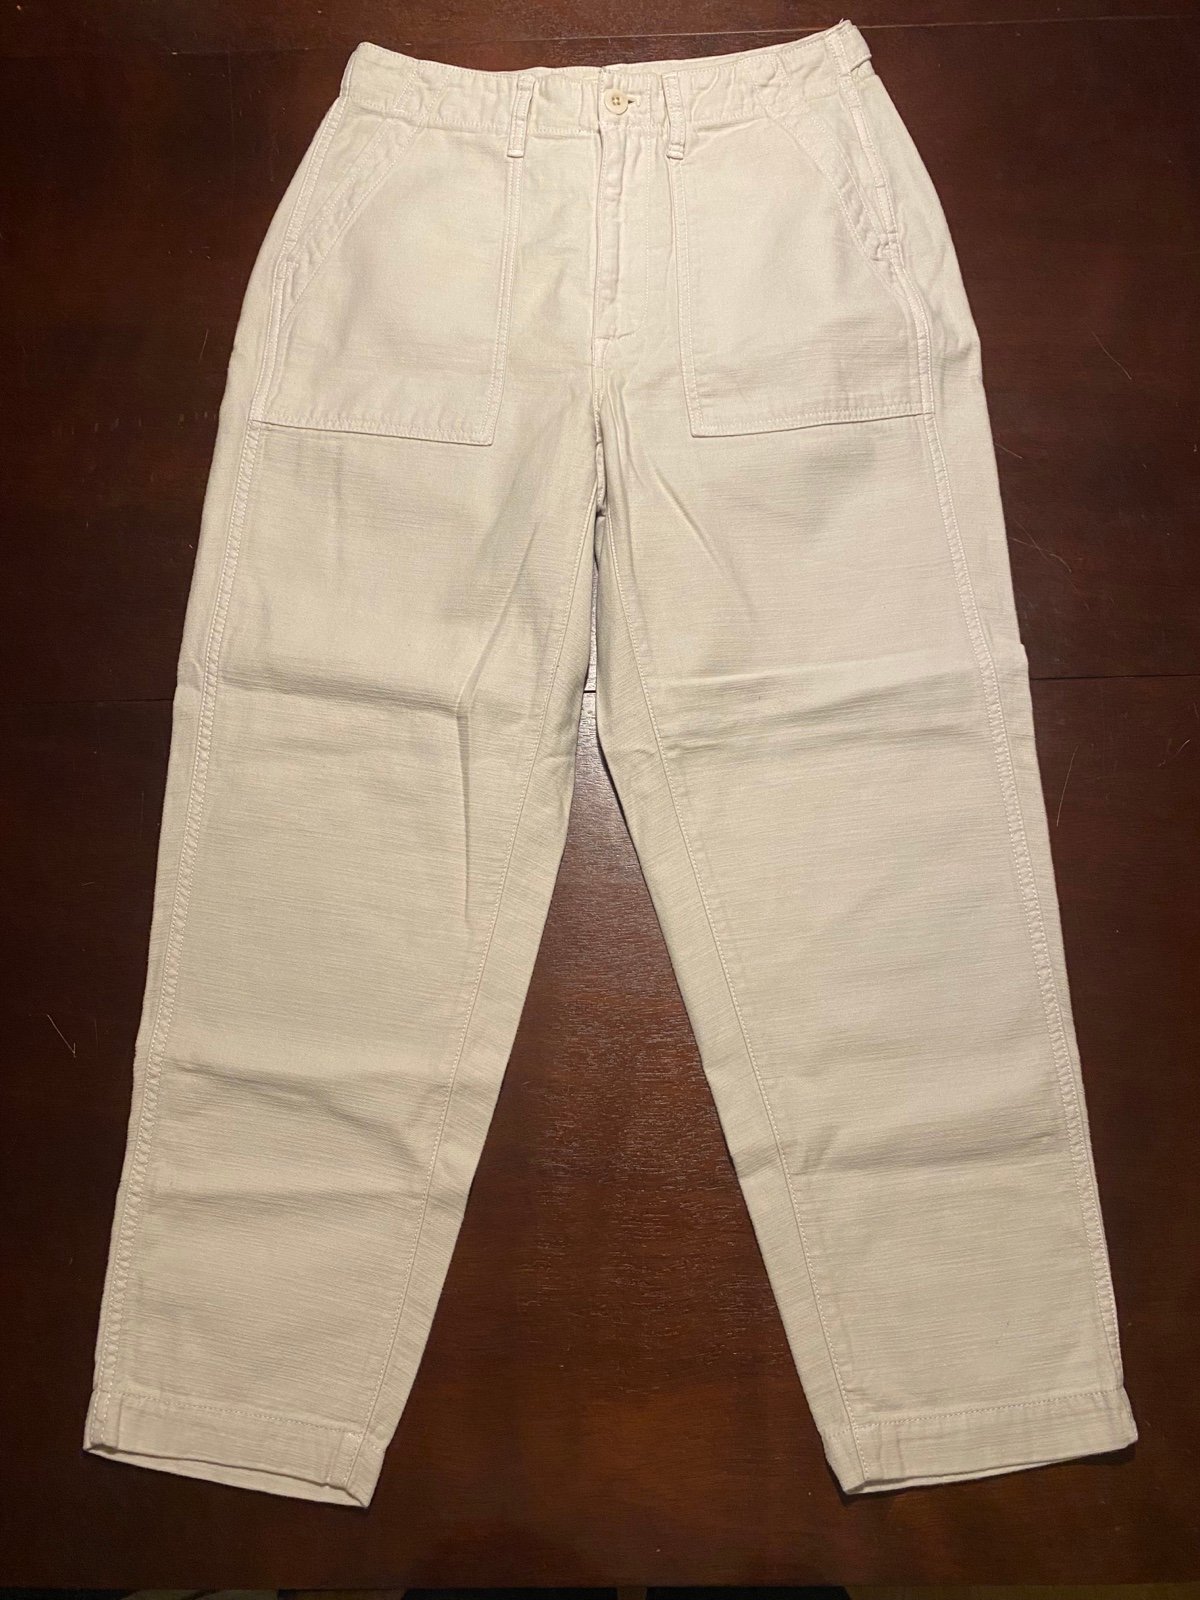 Discounted Womens Madewell Tan Beige Pants Size 27 100% Cotton O9fYf6RXG for sale